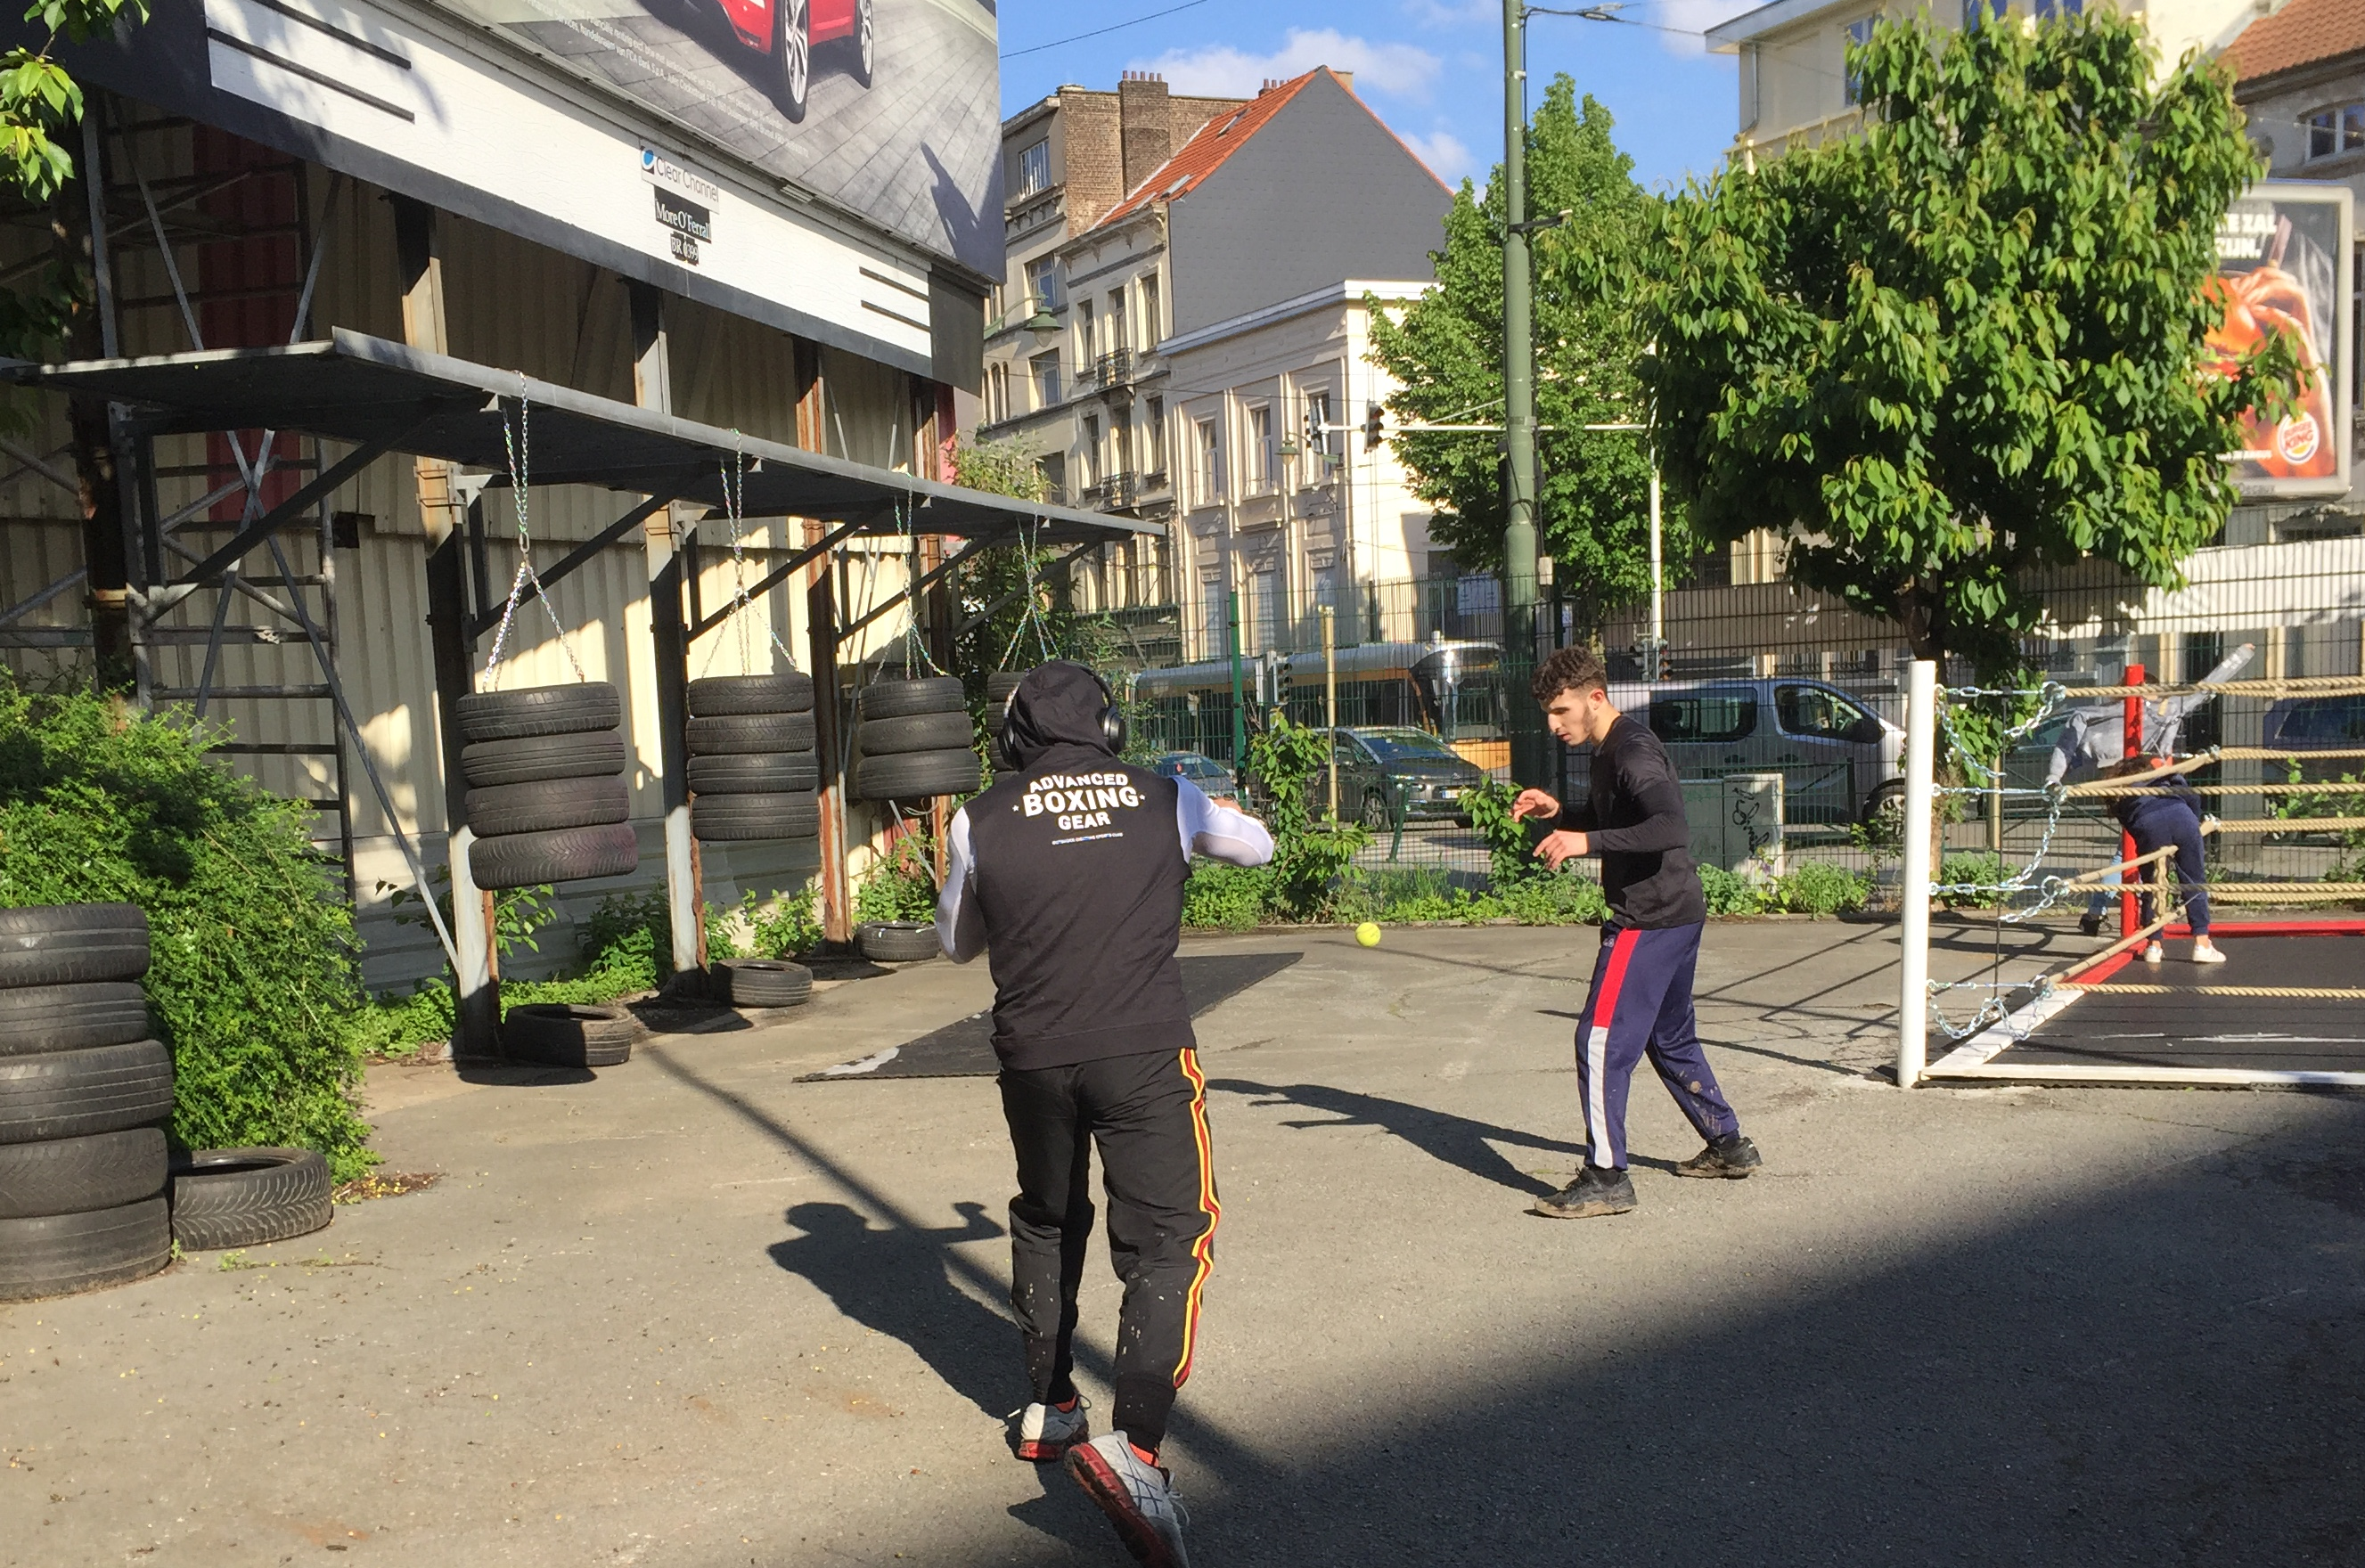 The Brussels Boxing Academy is an Olympic boxing club. Training is open to everyone: girls and boys, from 6 years of age. You can box for fun or in competition. Brussels Boxing Academy has various locations, including the old Cinoco building in Molenbeek.